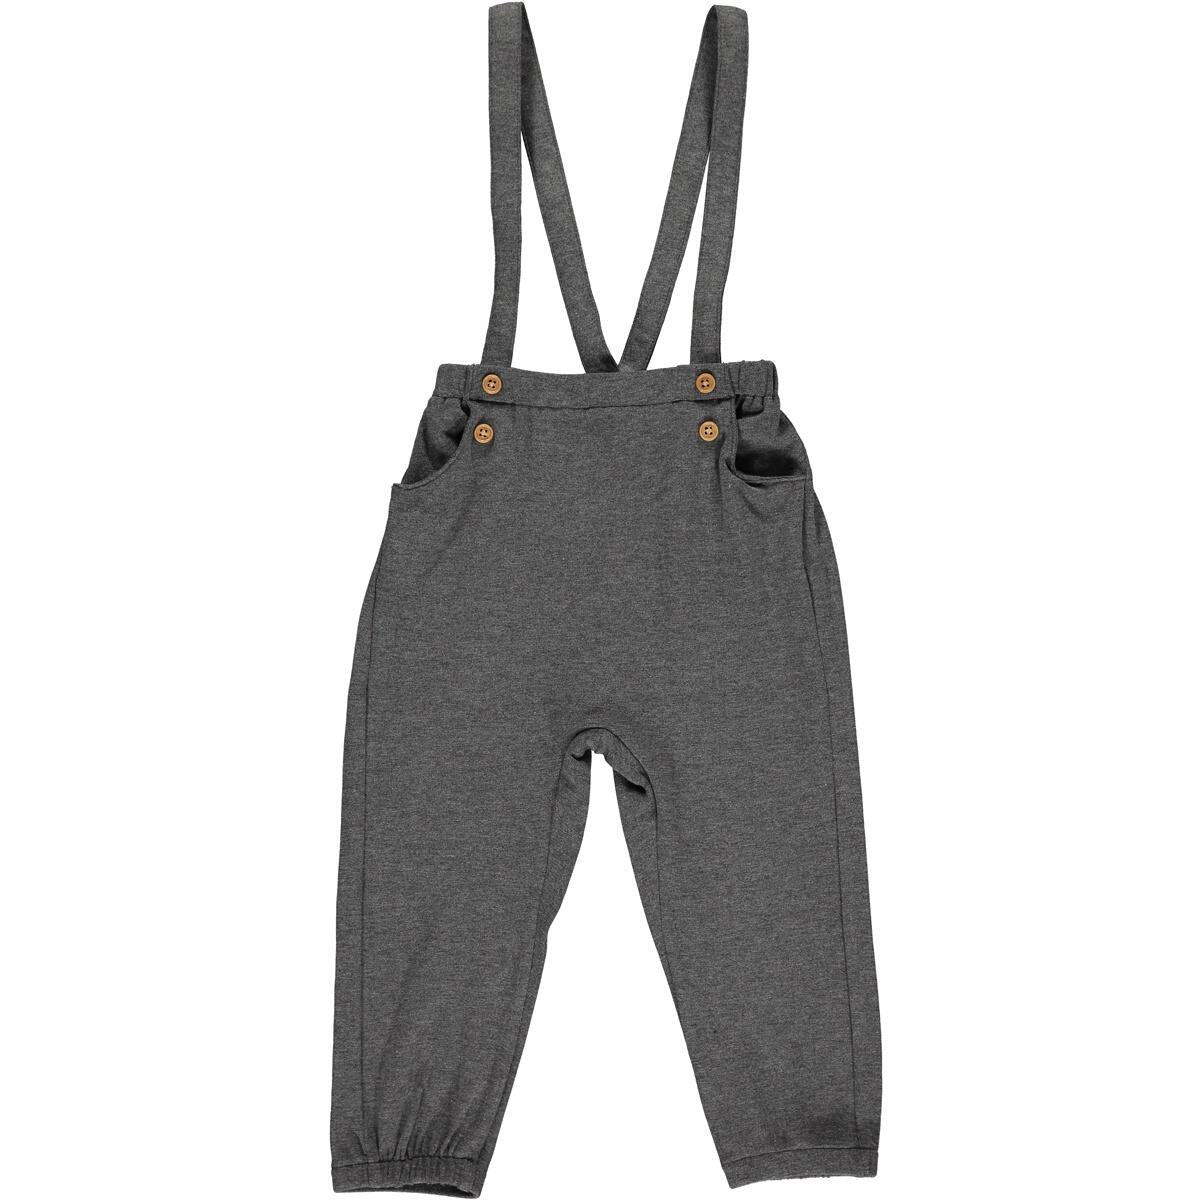 TINY VICTORIES OVERALL PANTS TV191C